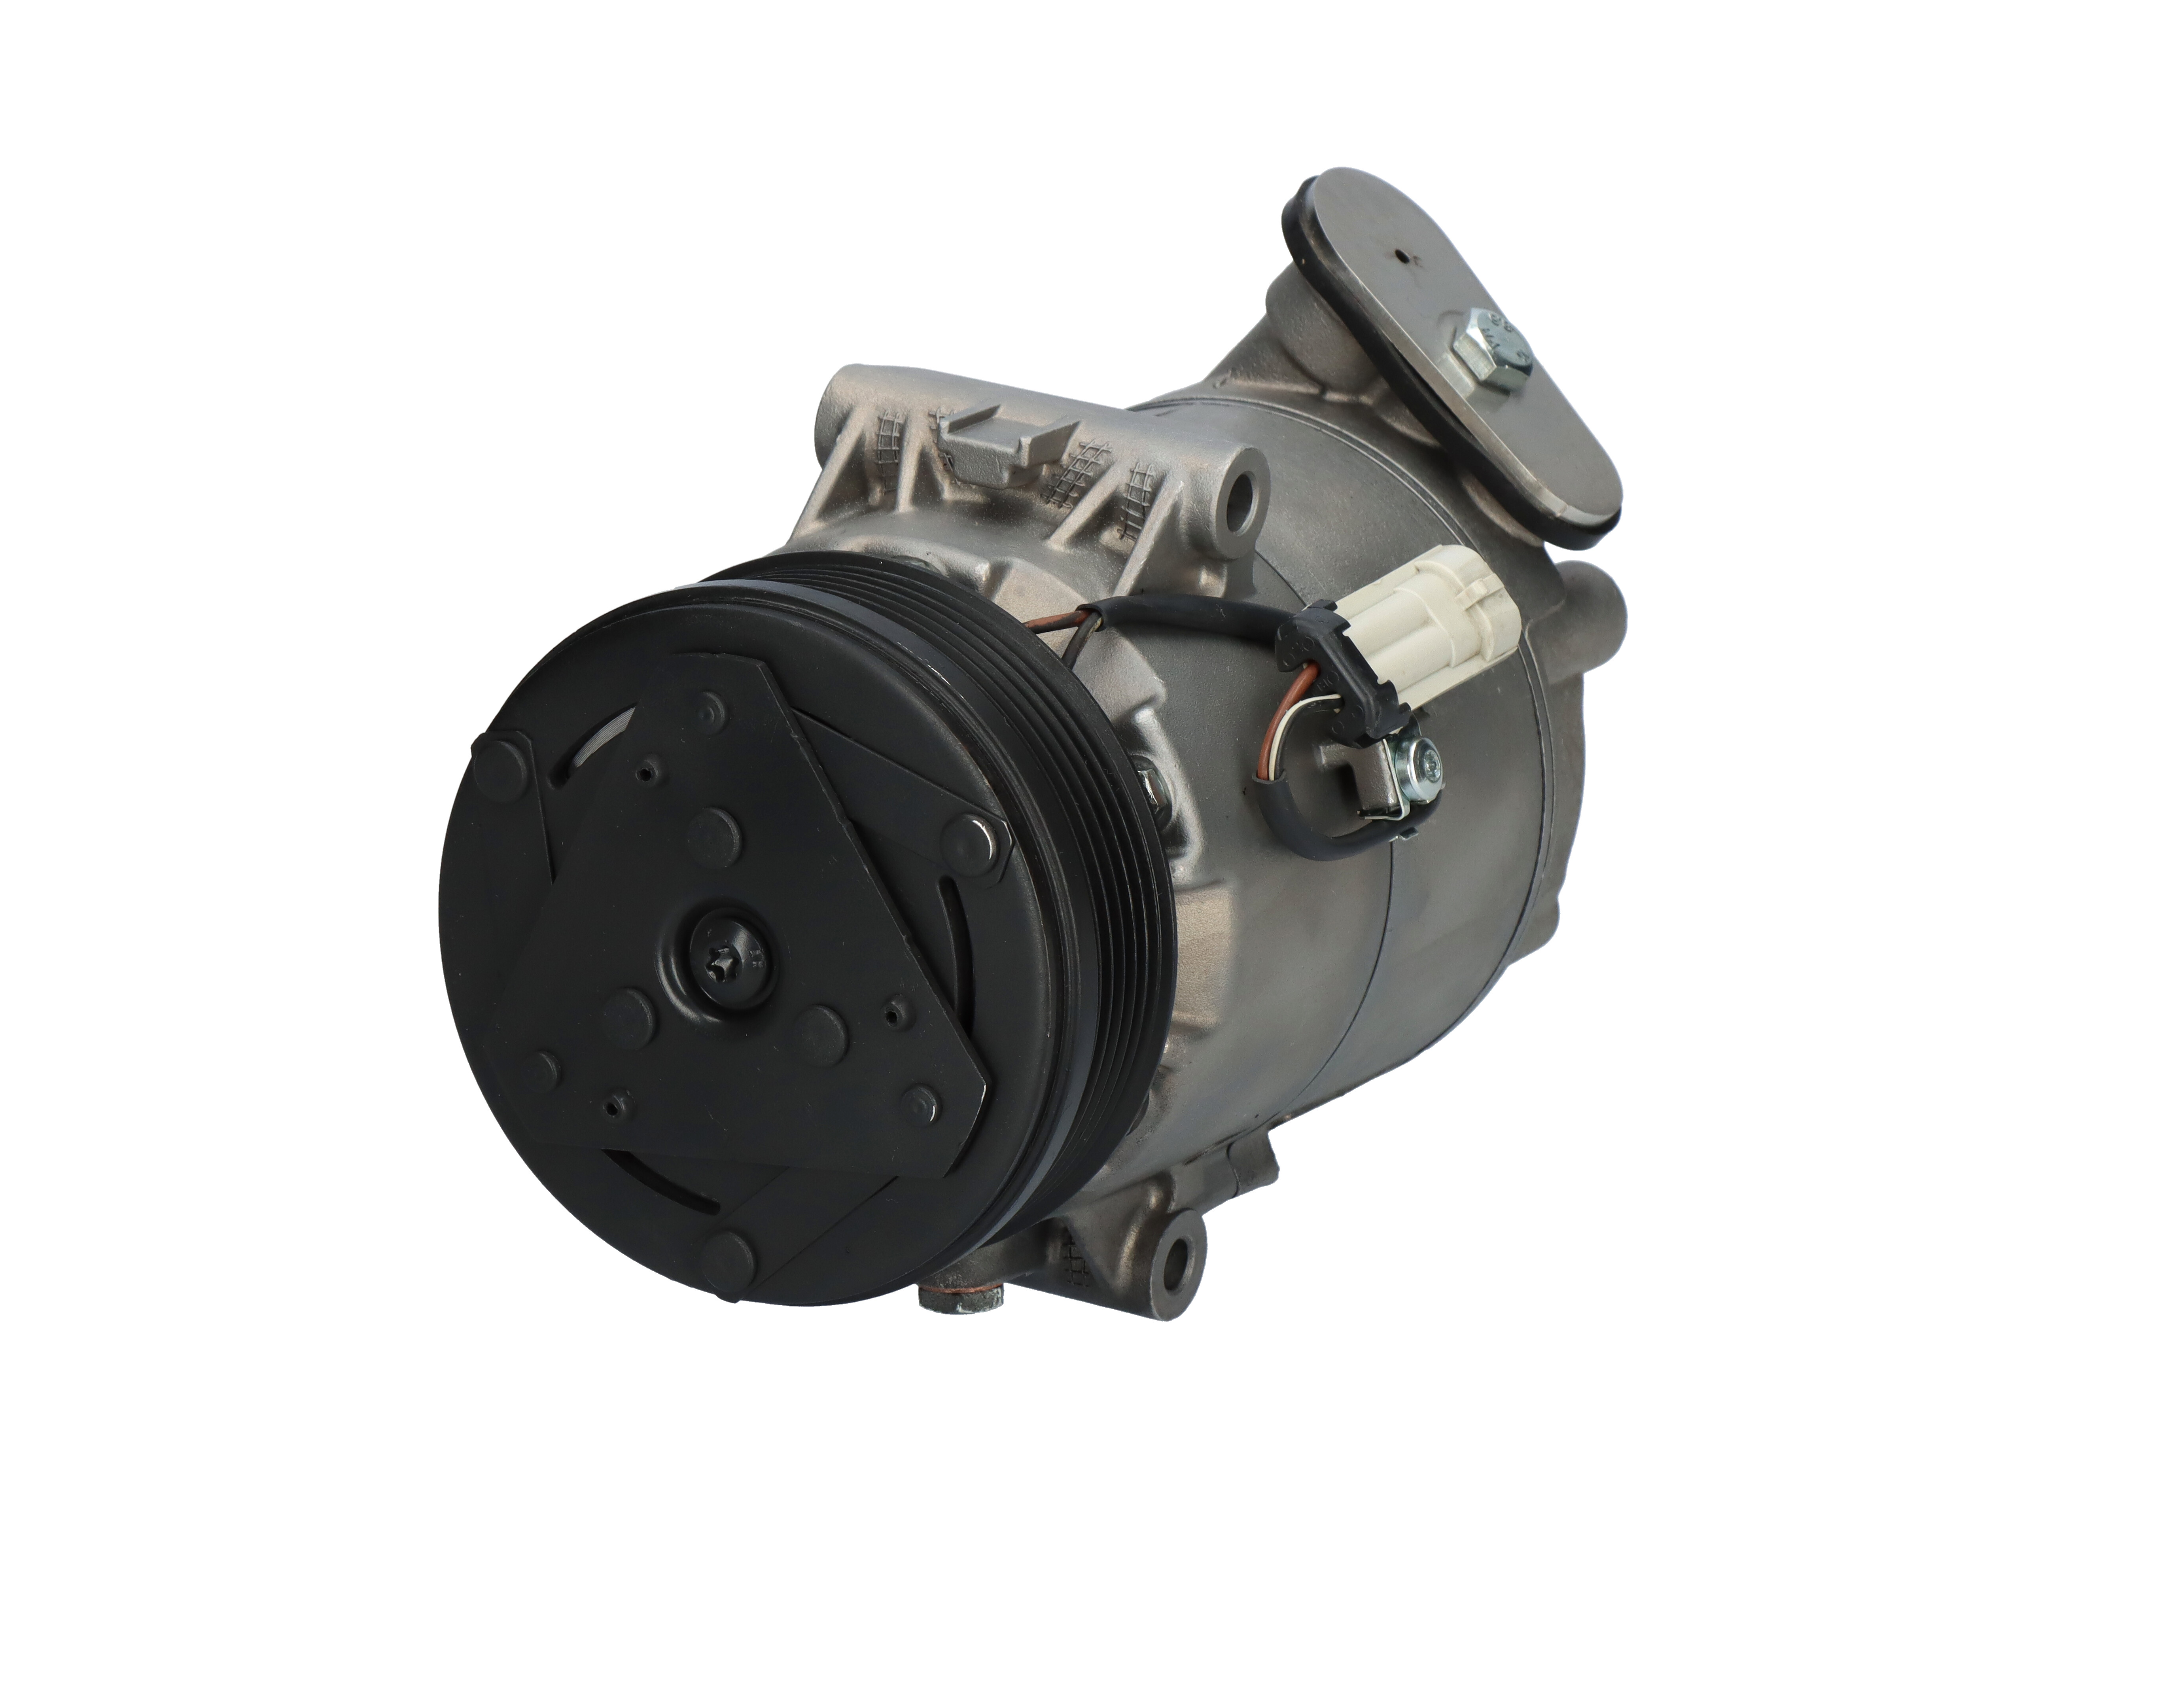 VALEO 813601 Air conditioning compressor CVC, 12V, PAG 46, R 134a, with PAG compressor oil, REMANUFACTURED